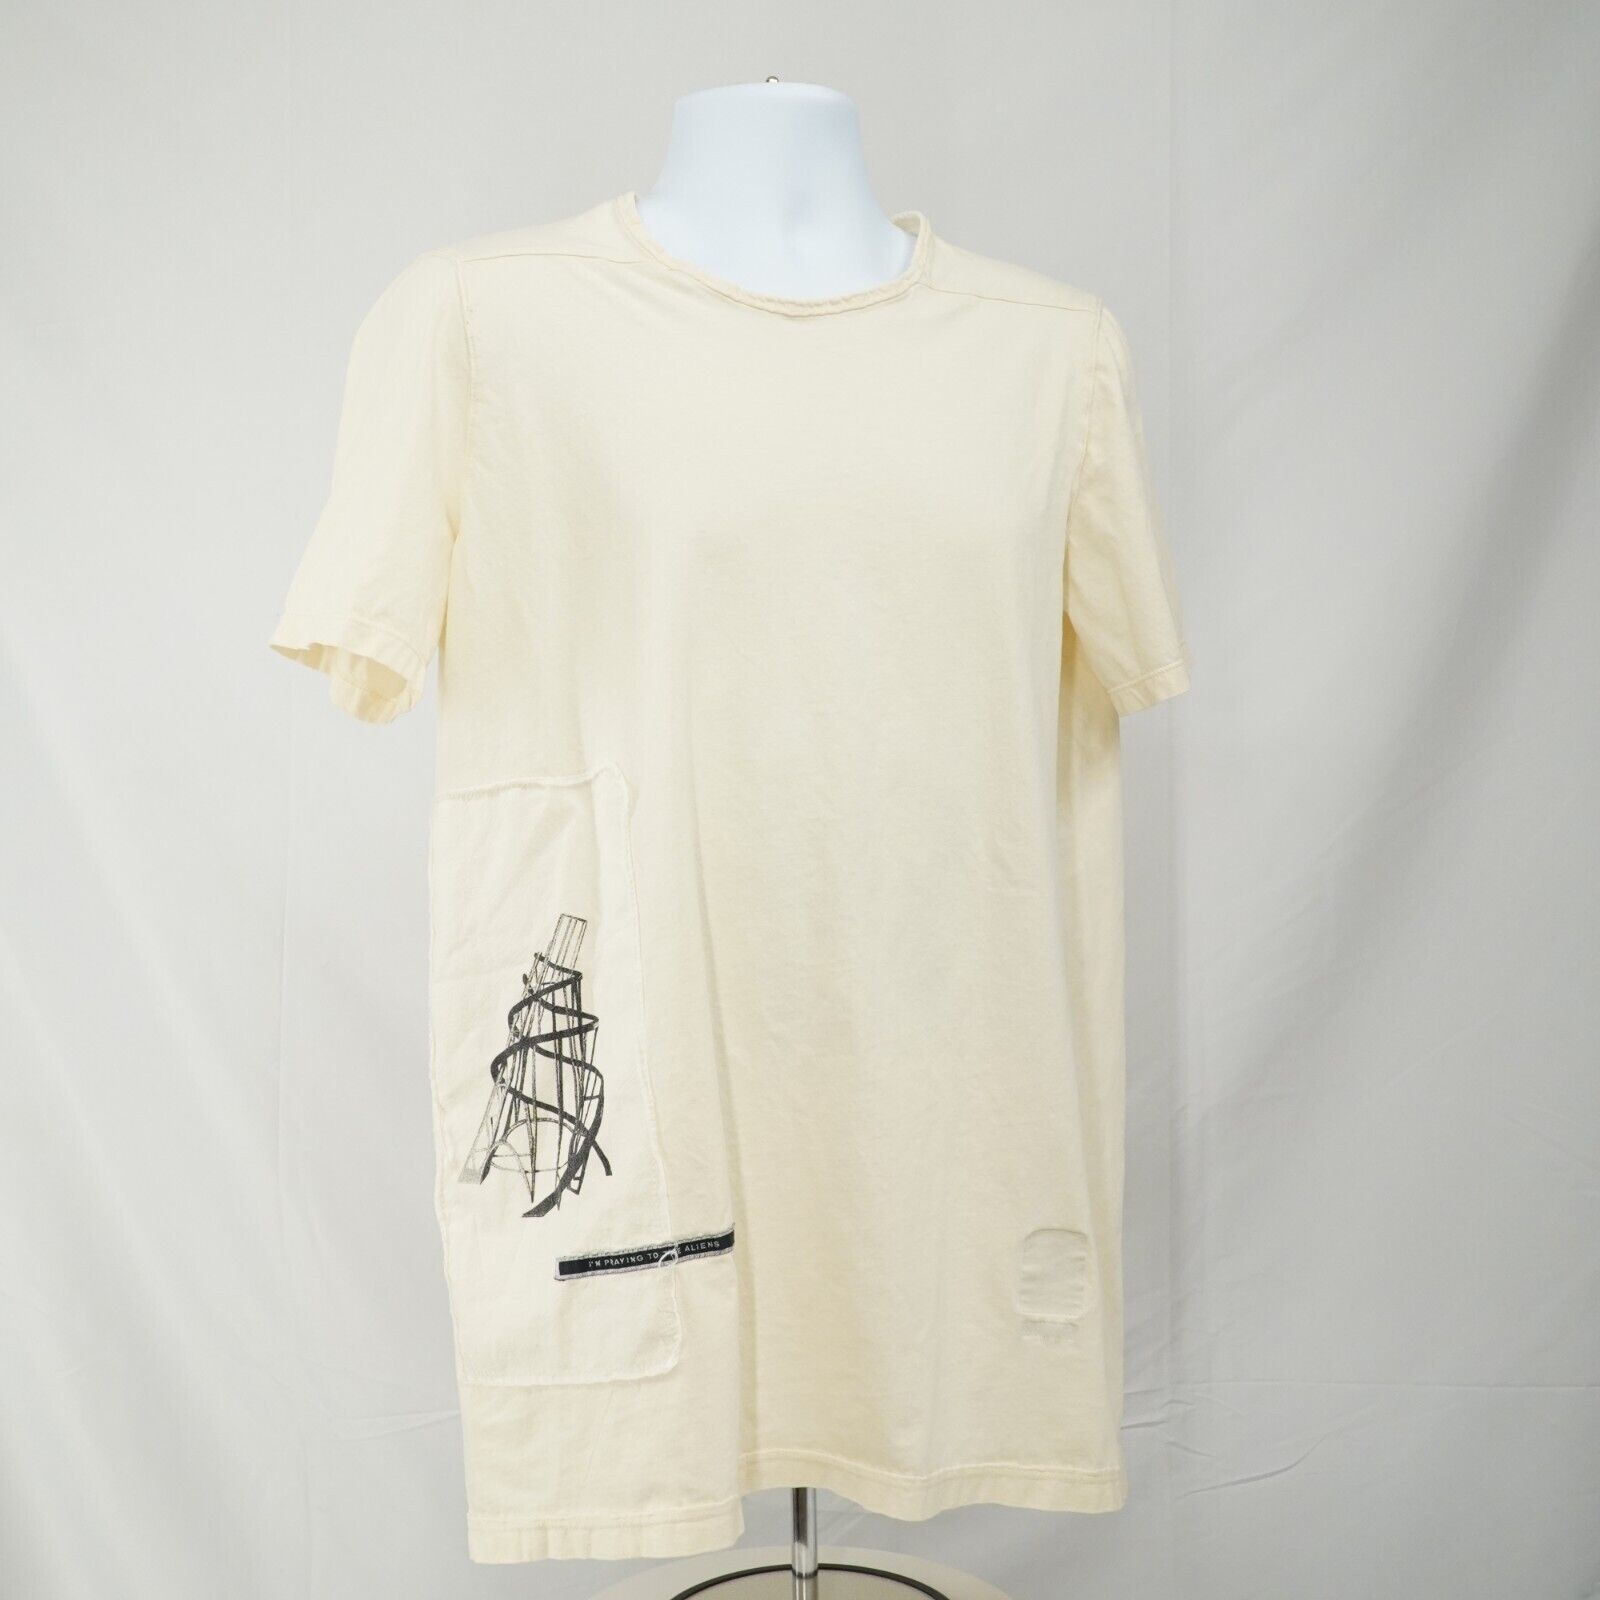 DRKSDHW Patched Level Tee Milk White Cotton - Lar - 21